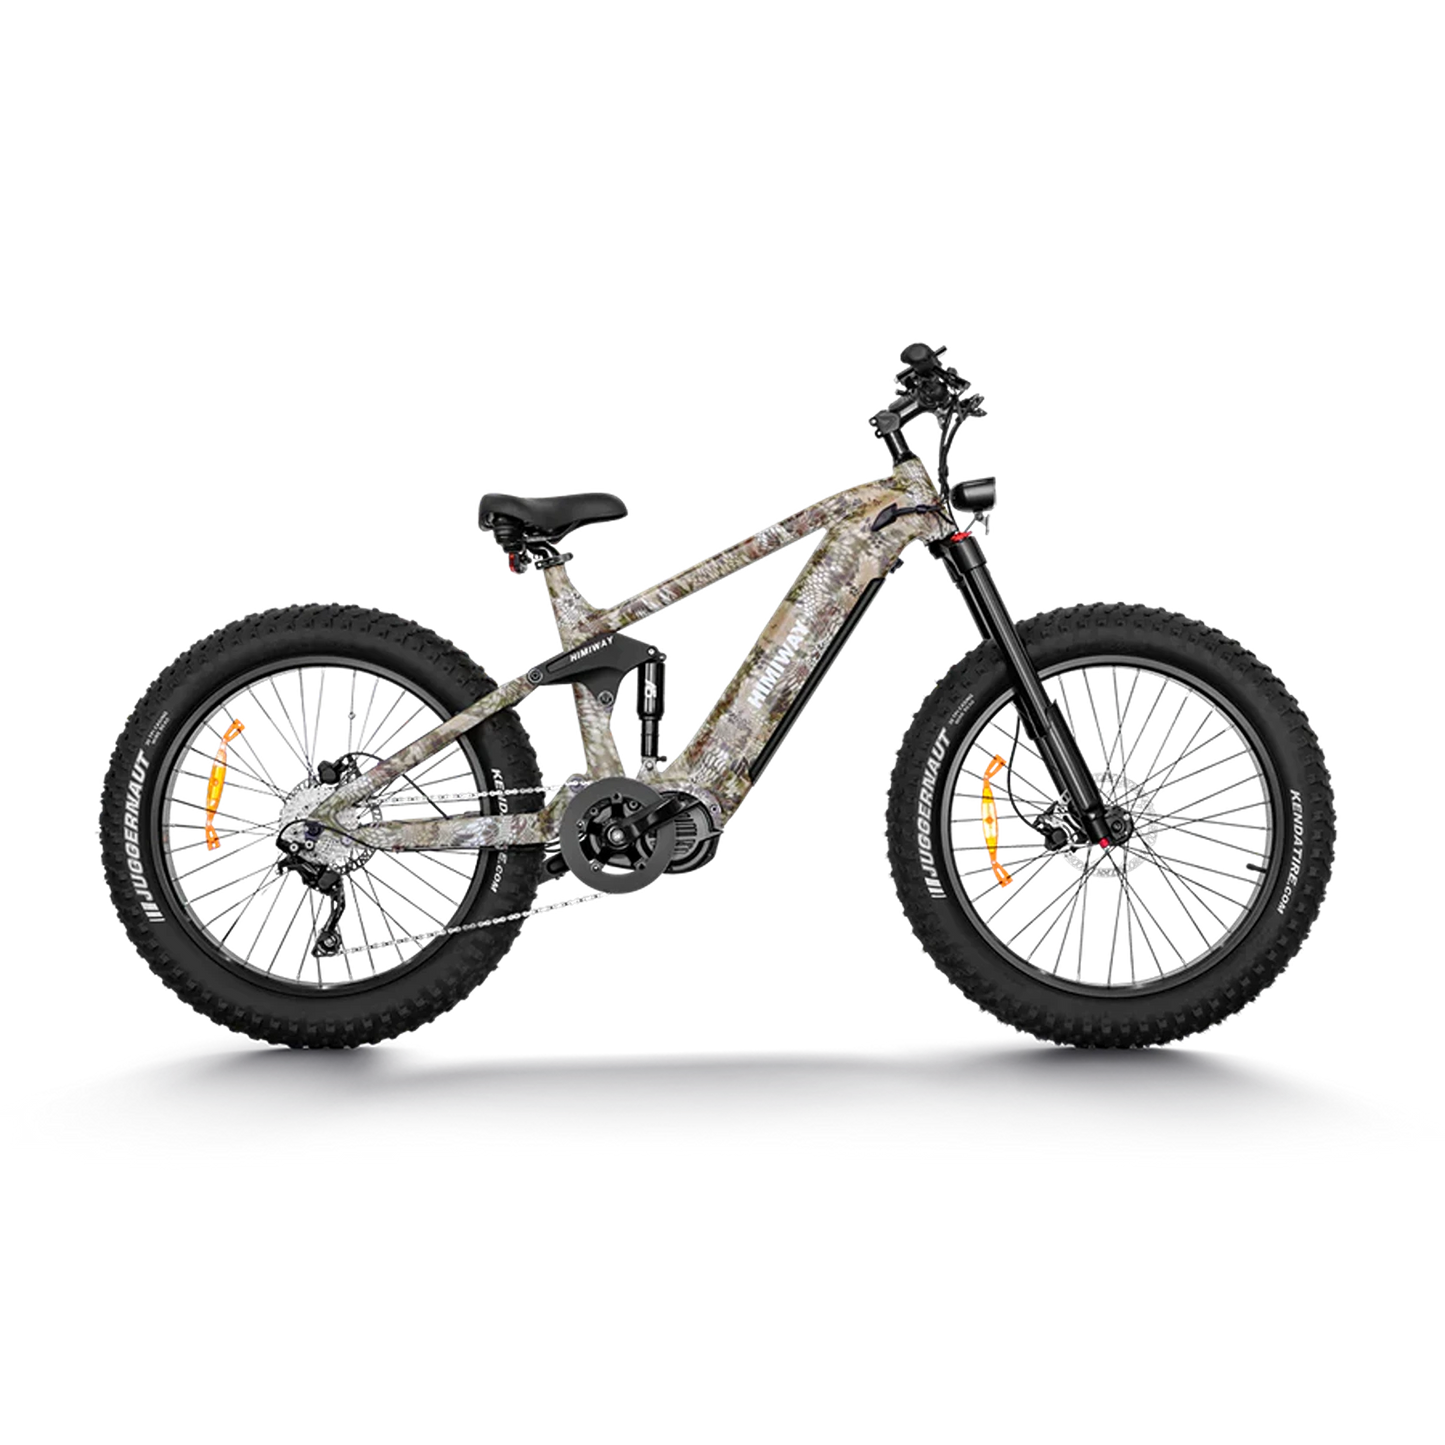 Himiway Cobra Pro Electric Mountain Bike Extra Long Distance w/ All Terrain Super Fat Tire, 1000W For Steep Mountainous Hills, Suspension For Comfort, Safety On The Toughest Riding Conditions - For Off-Road, Hunting, Trail Riding